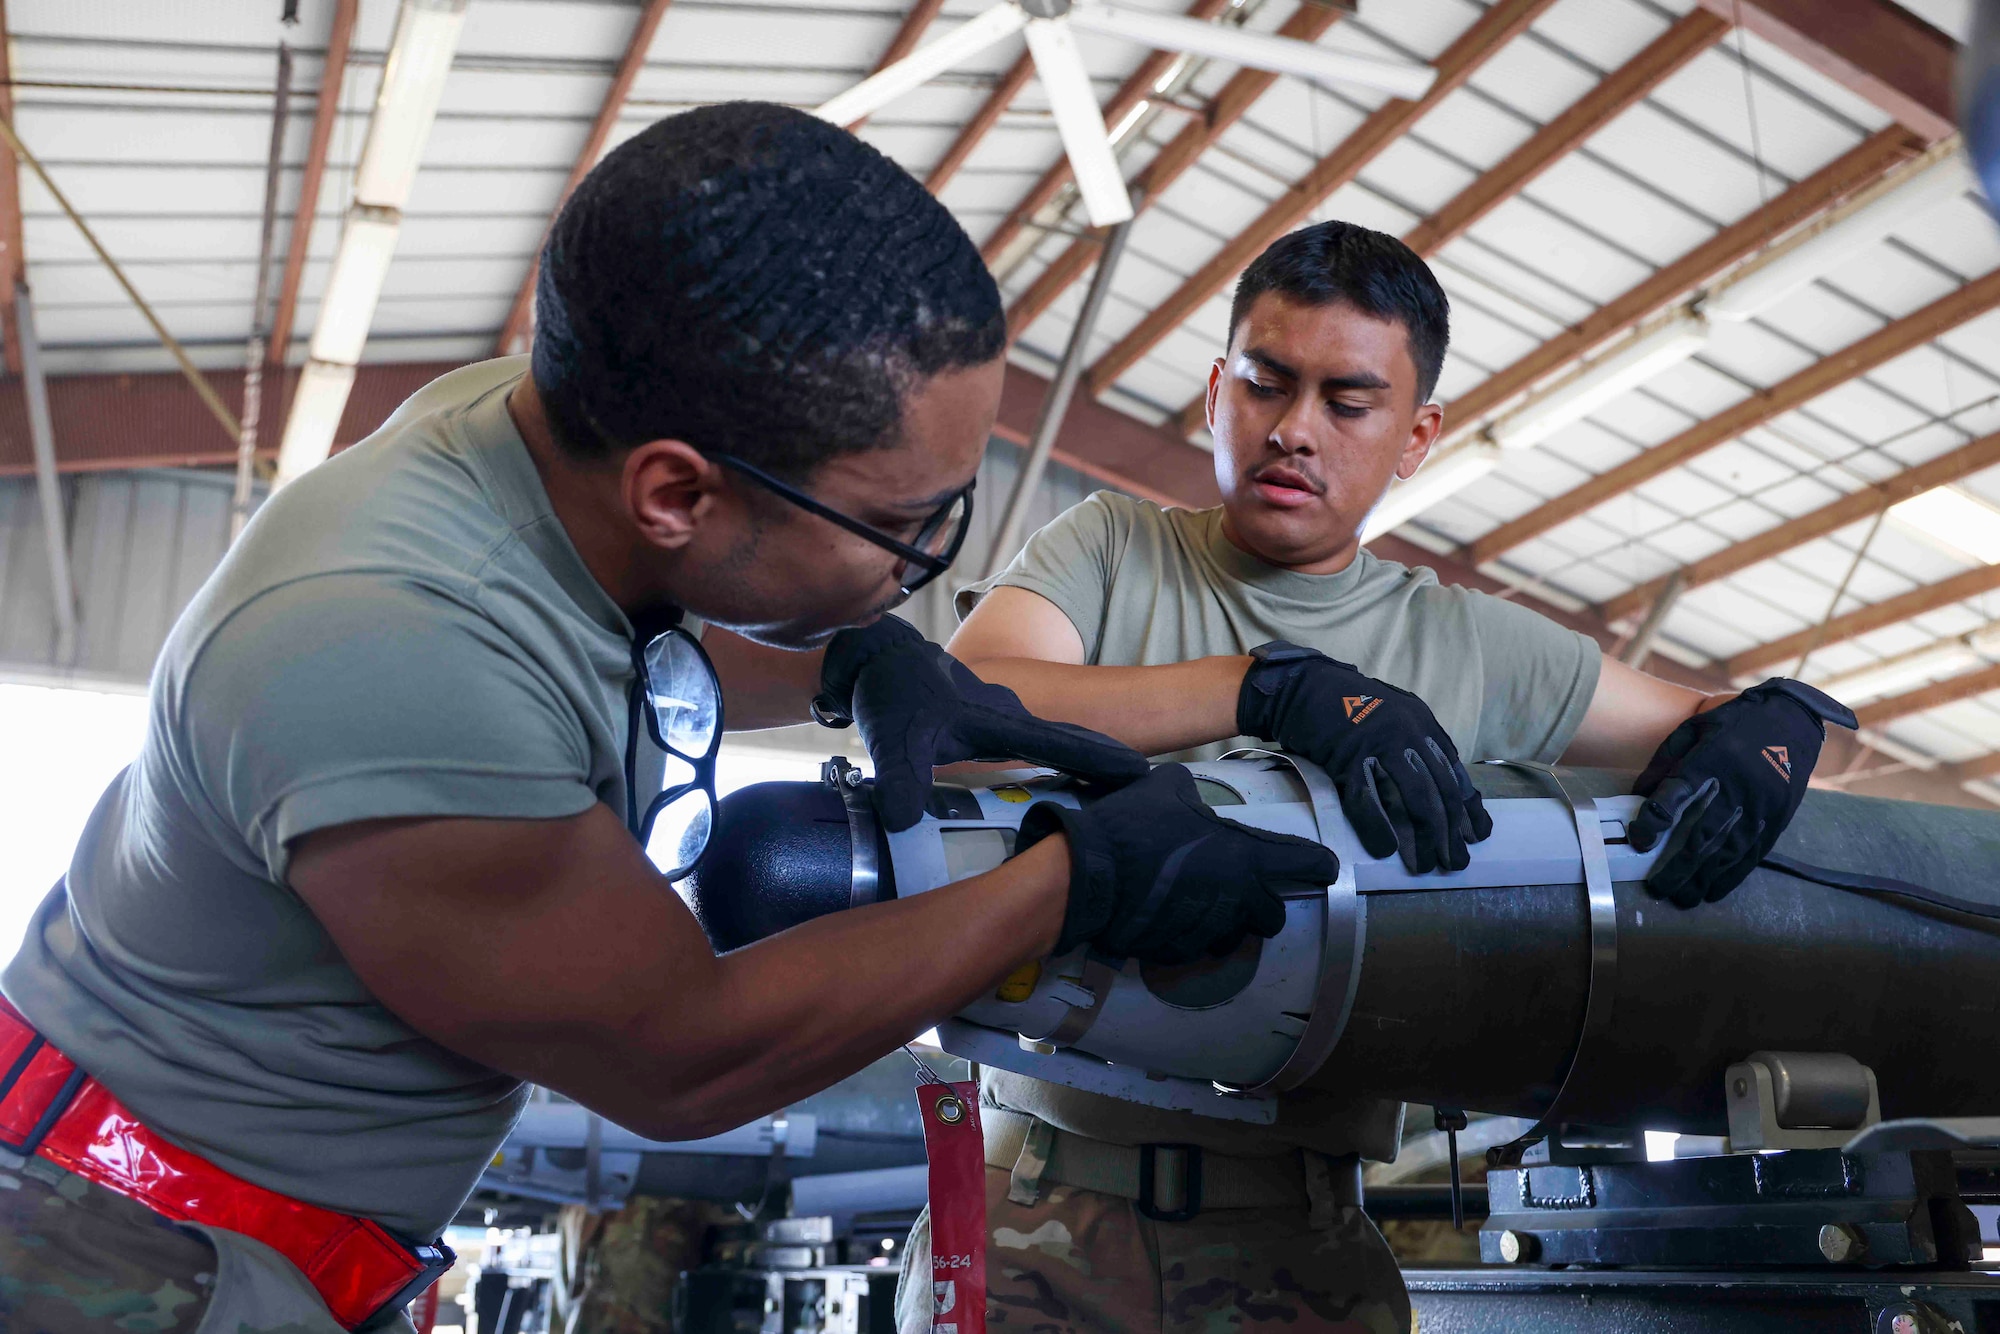 U.S. Air Force Airmen from Whiteman Air Force Base, Missouri, 509th Munitions Squadron, build GBU-54 munitions as part of an event during the Air Force Combat Operations Competition, Aug. 23, 2023, at Beale AFB, California.